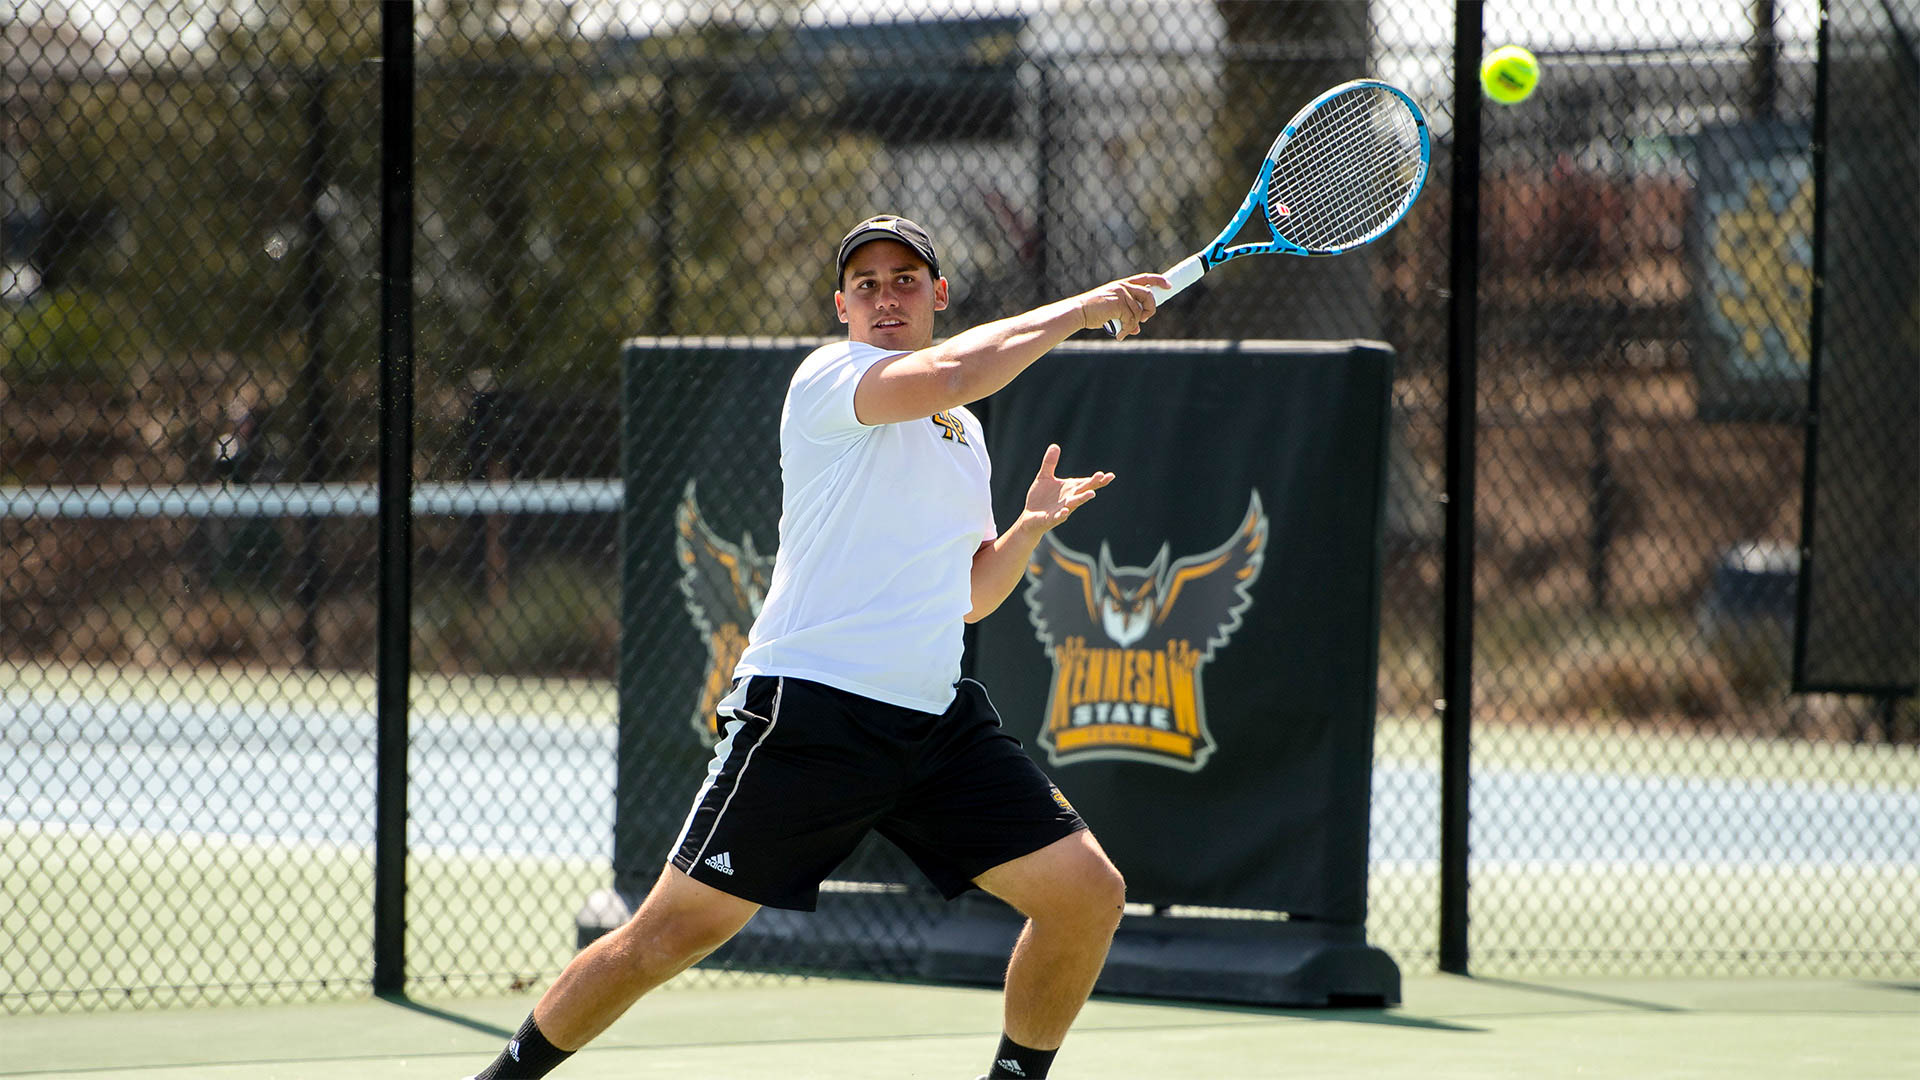 Owls win singles and doubles titles at Mercer Gridiron Classic